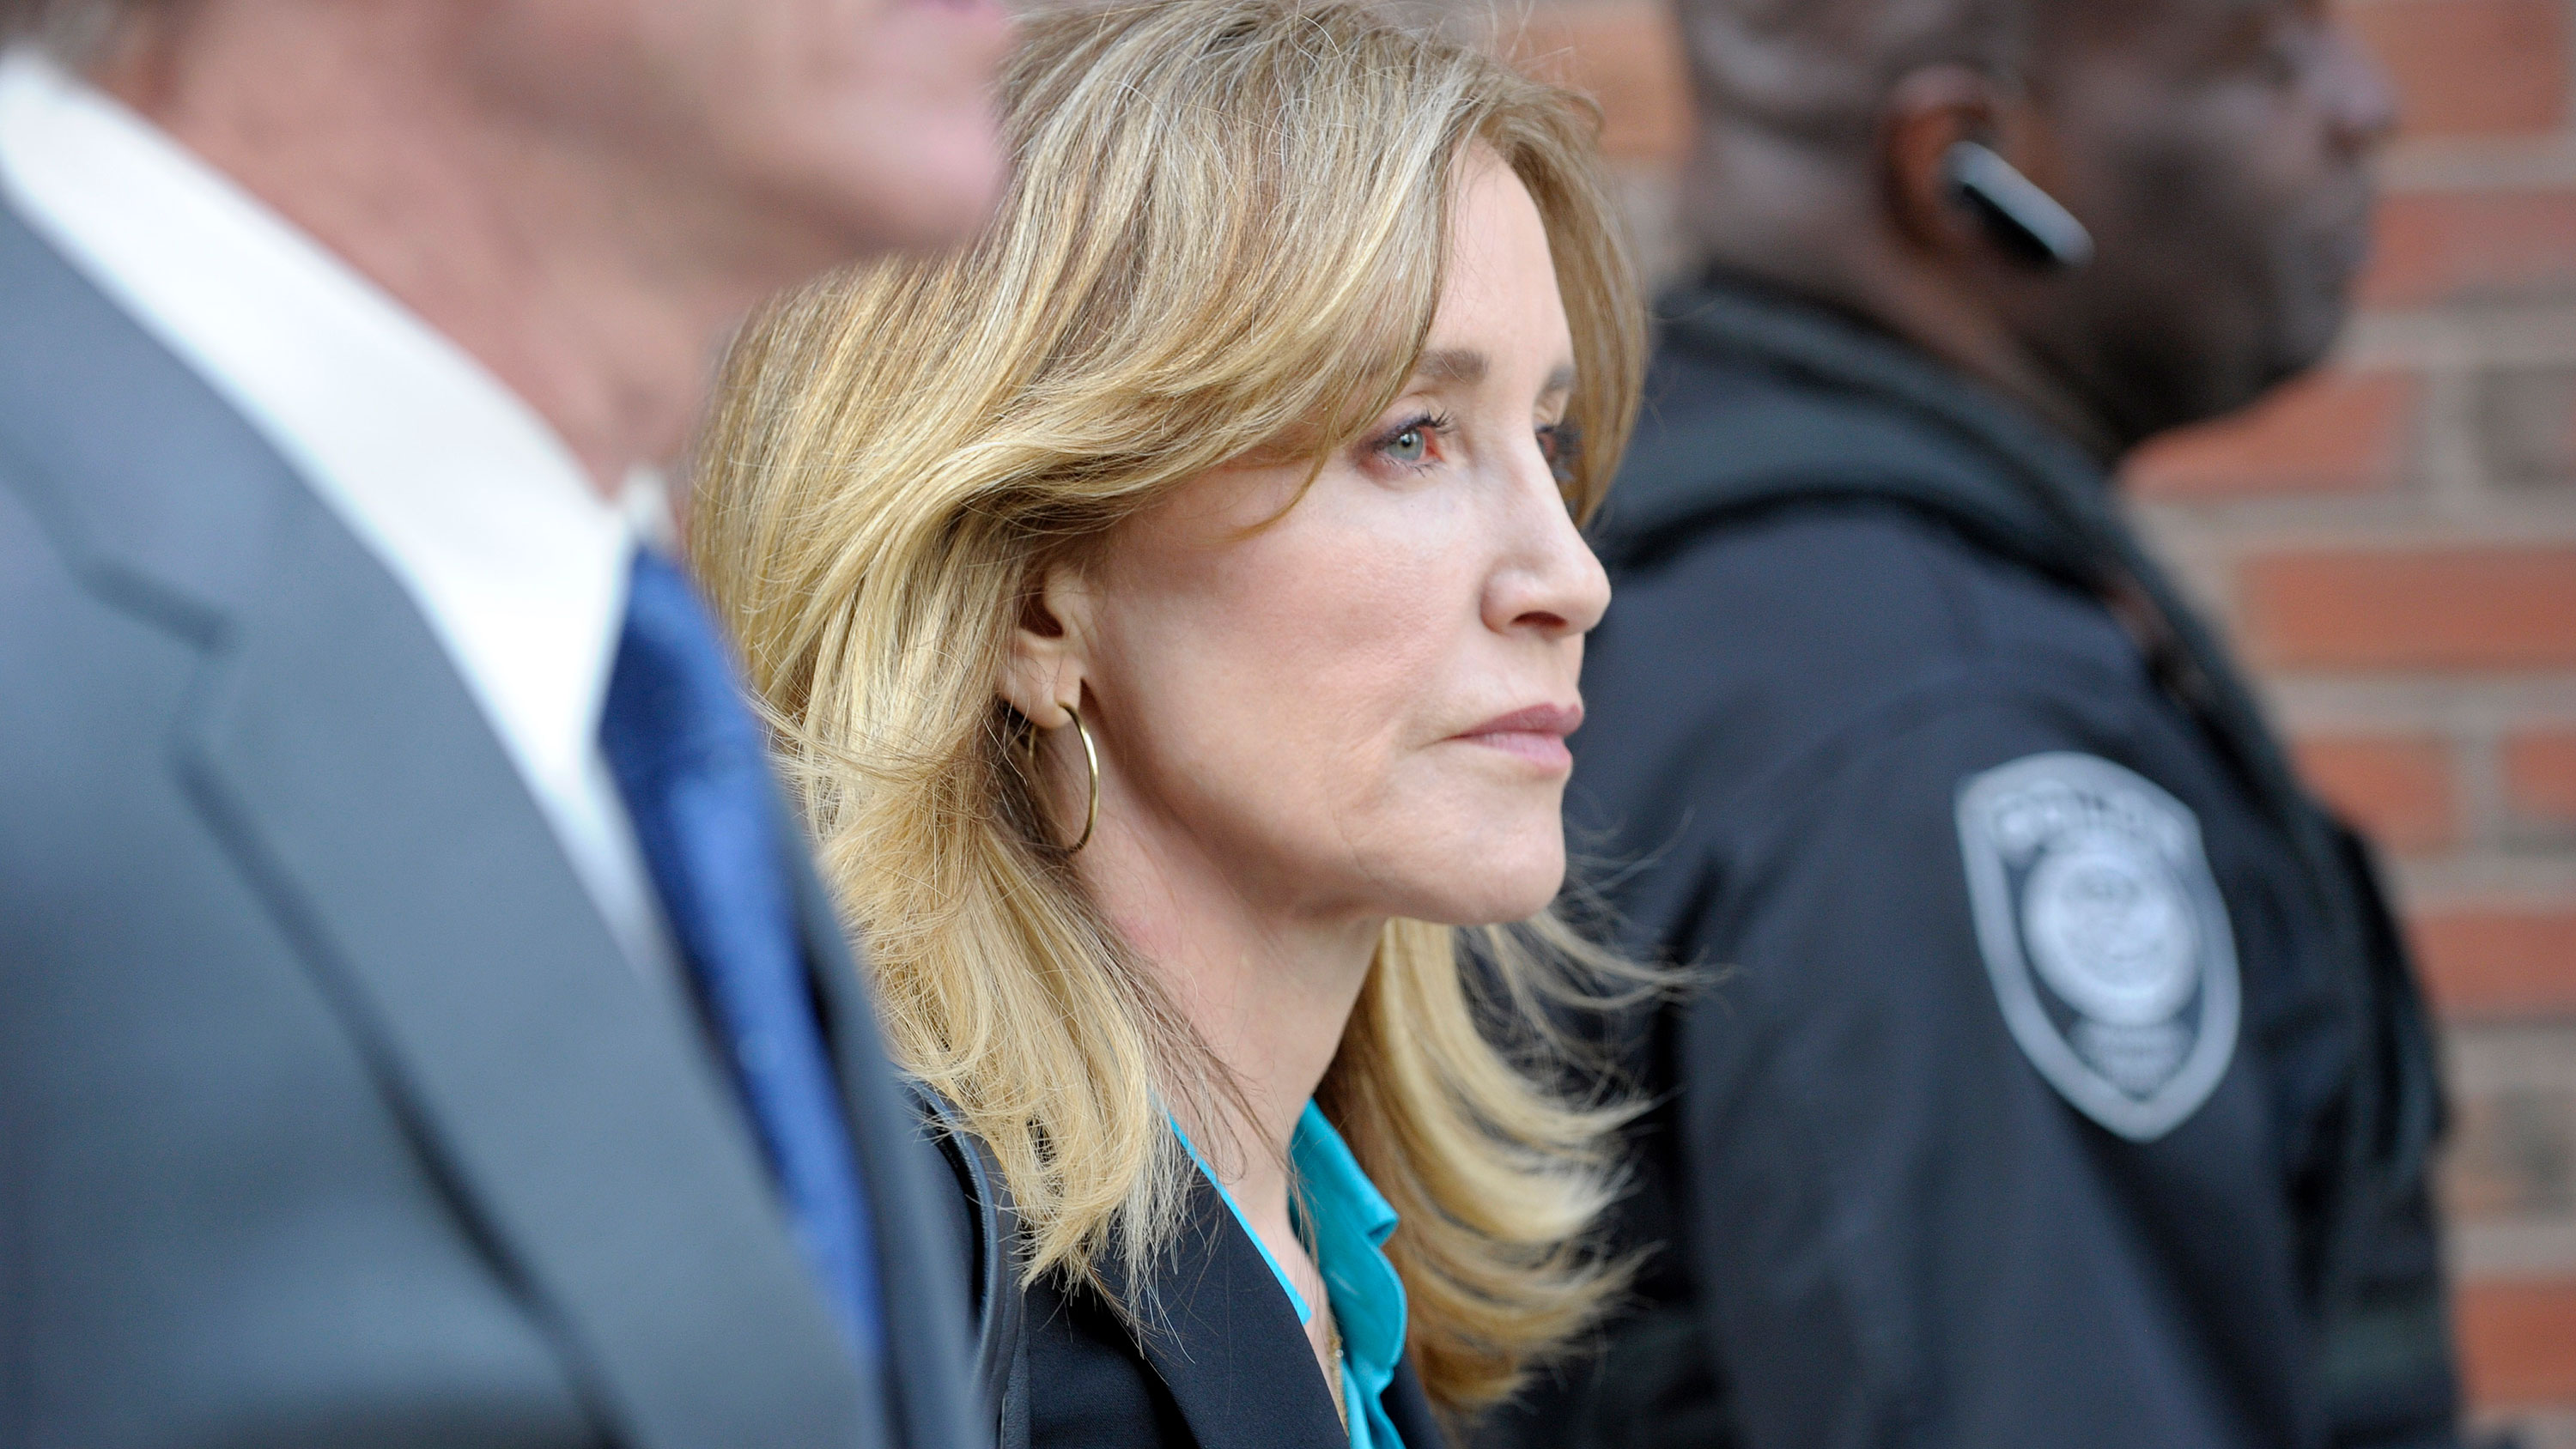 Felicity huffman images